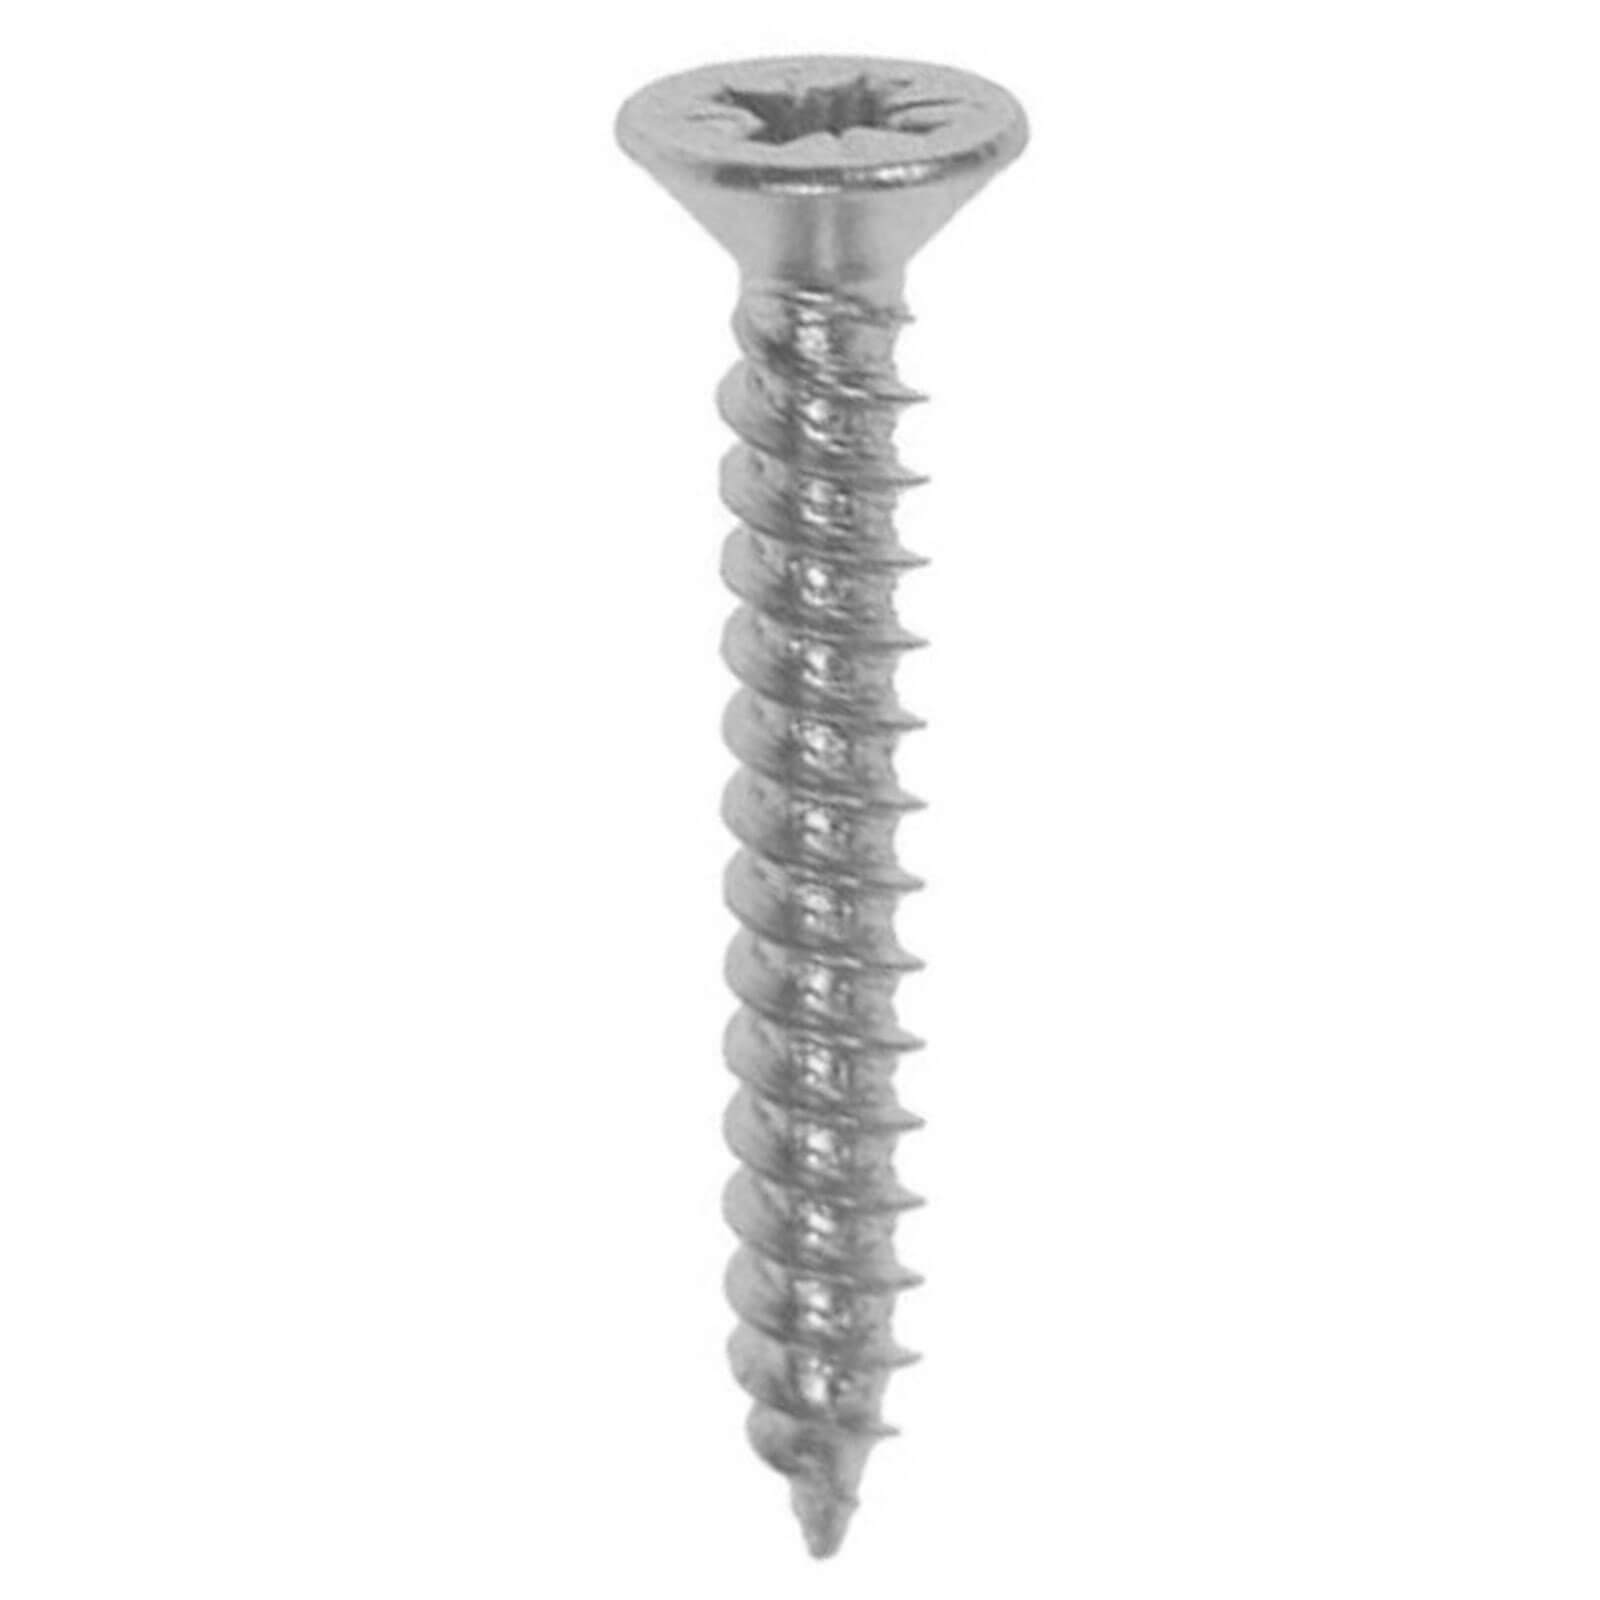 Photos - Nail / Screw / Fastener TIMCO Self Tapping Countersunk Pozi Screws 4mm 19mm Pack of 25 00634CCAZP 